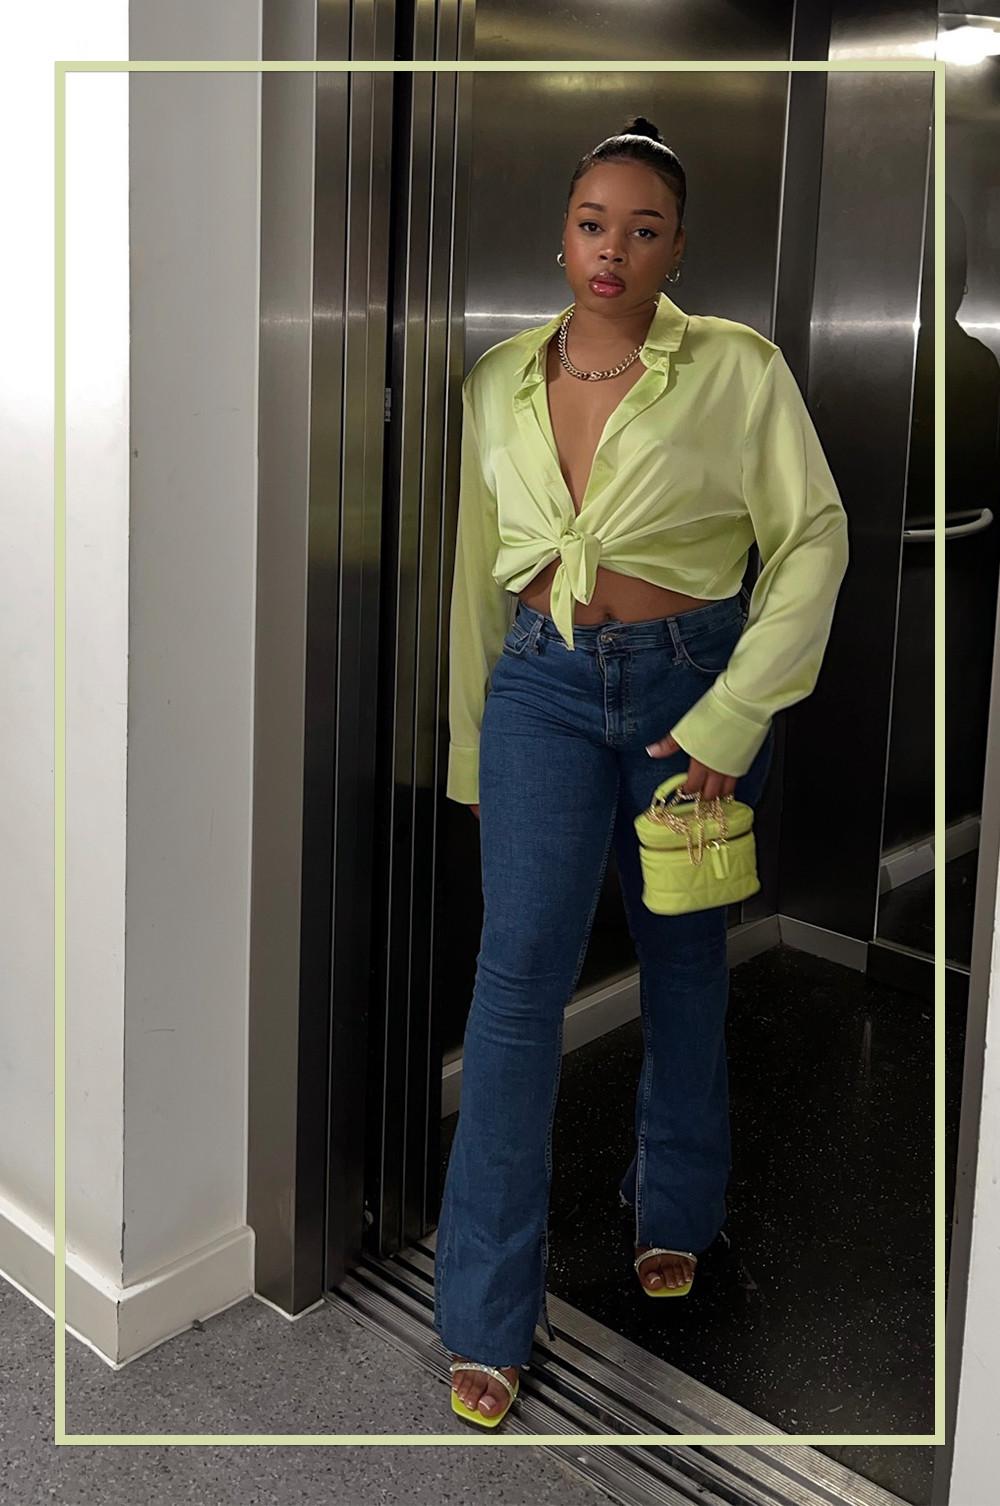 @sharayethomas wearing green blouse, blue flared jeans, small bag and heels